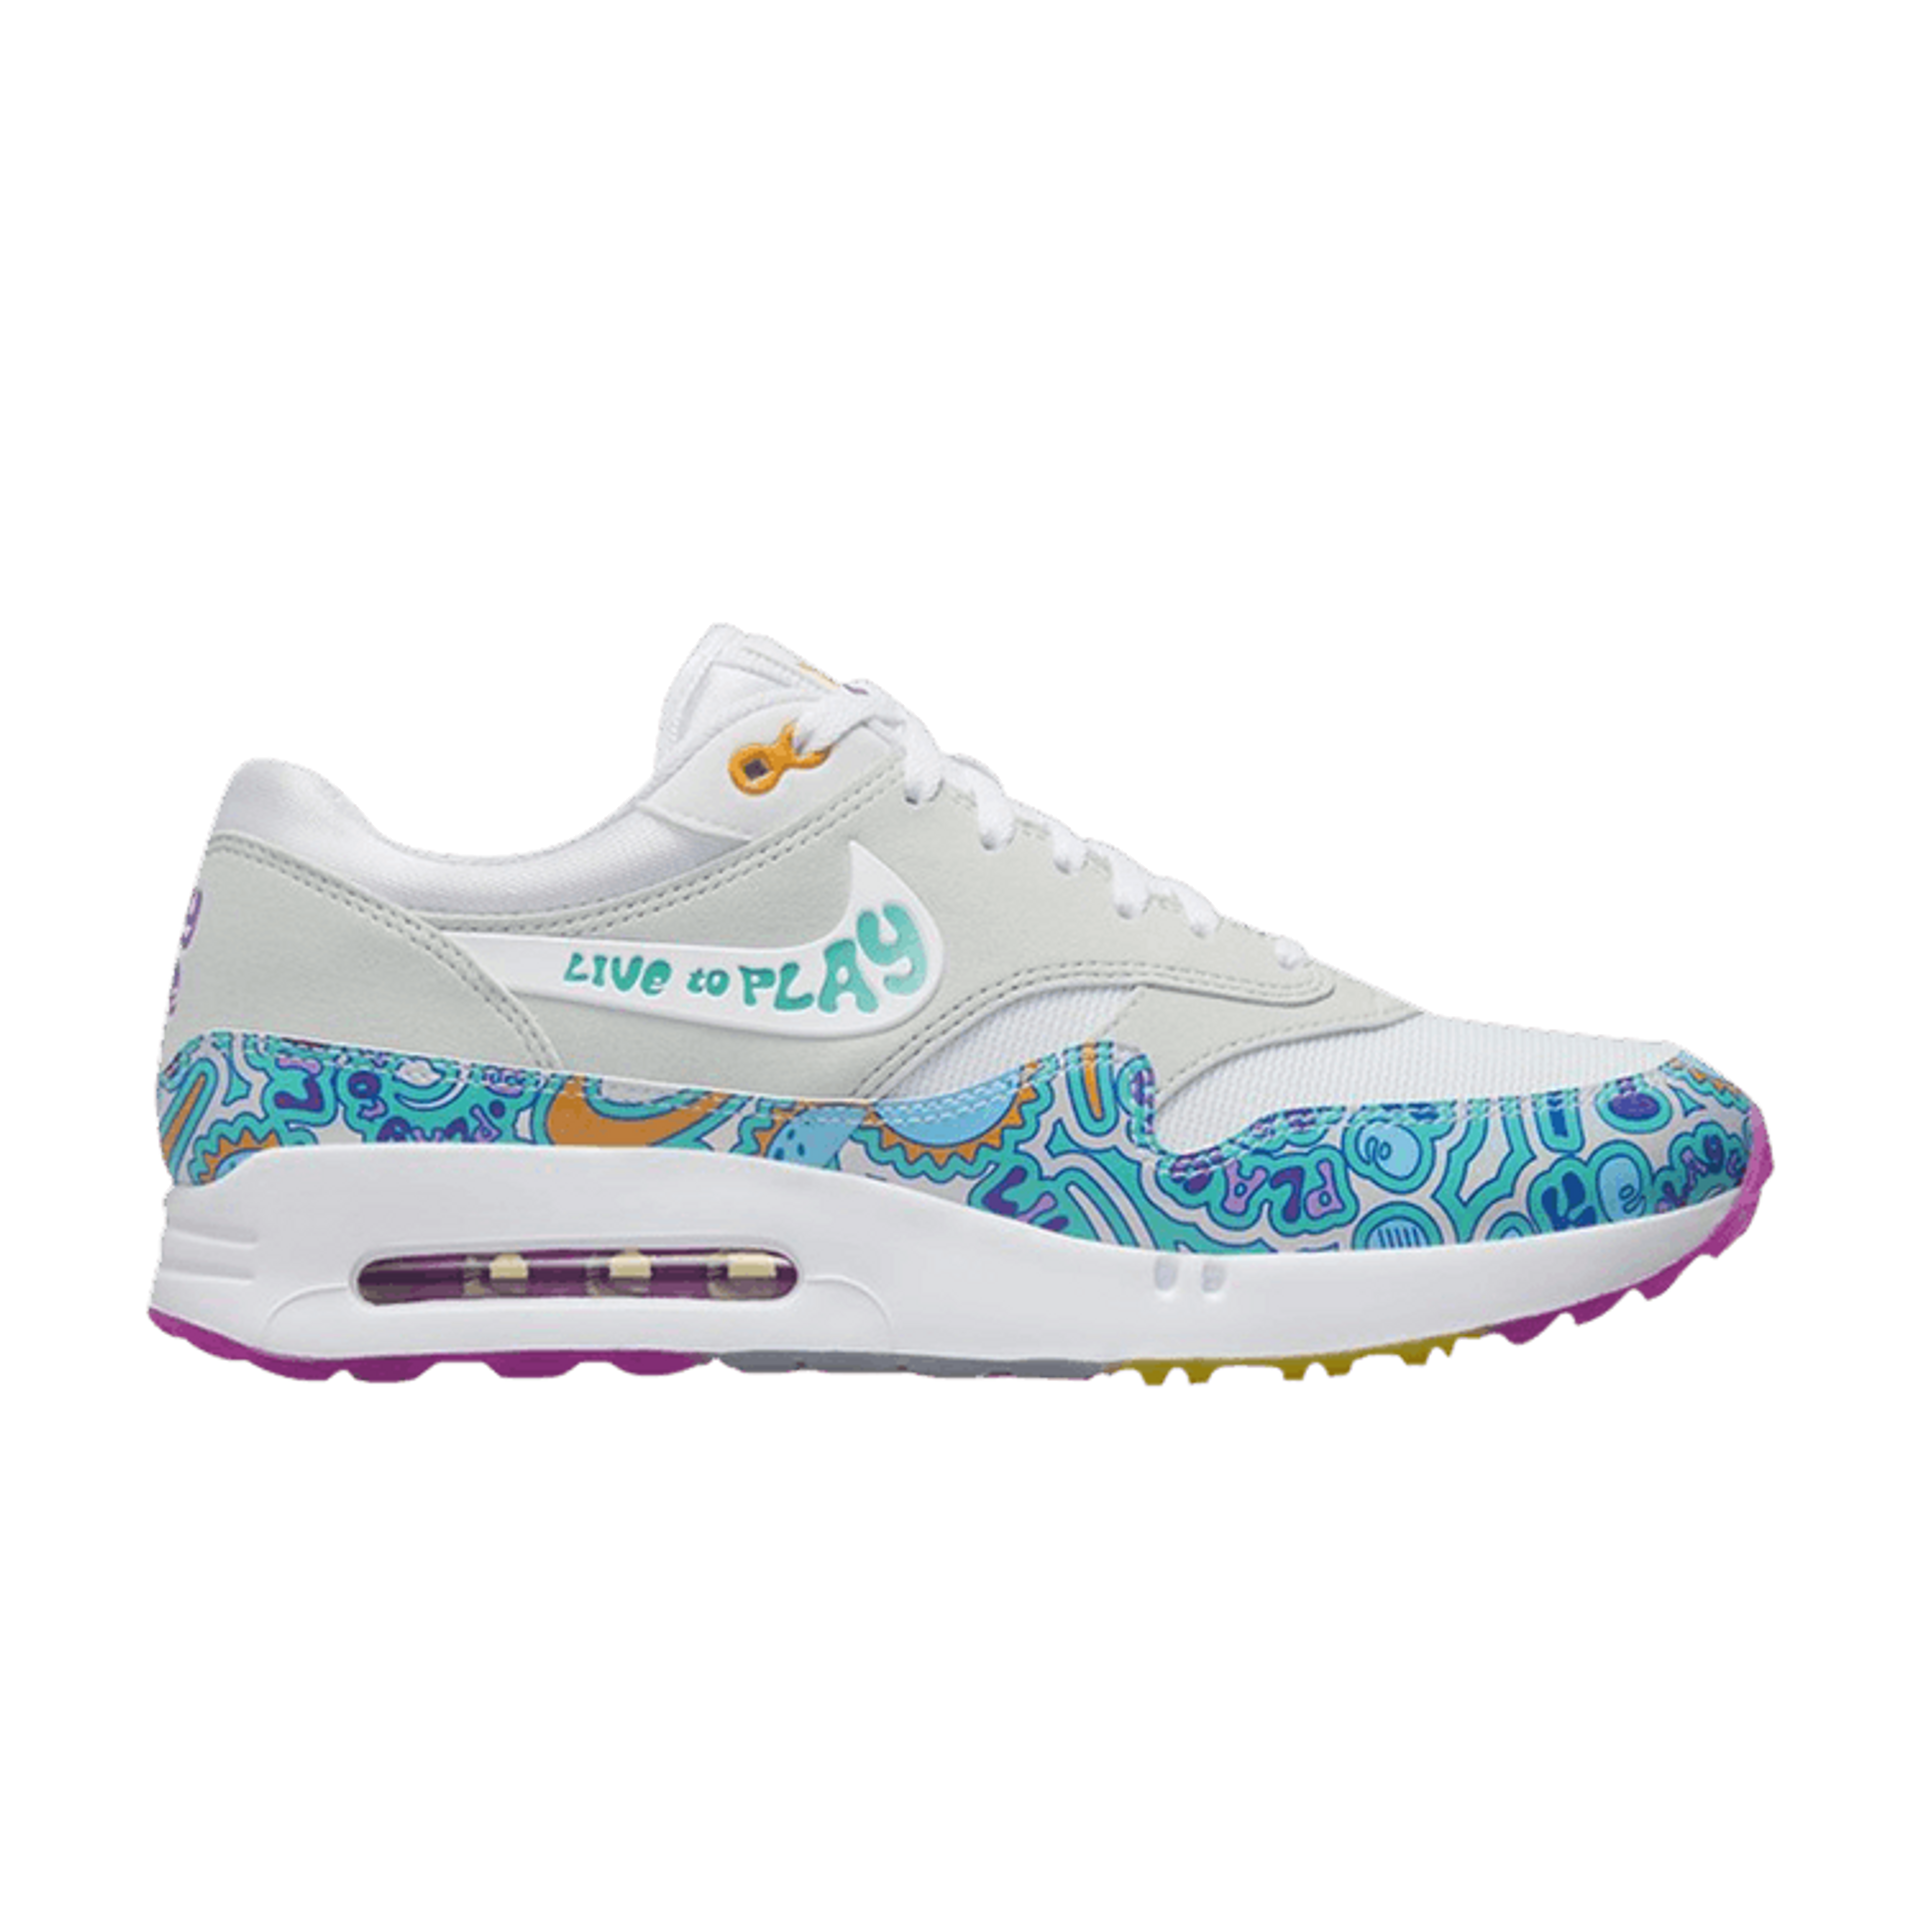 Nike Air Max 1 '86 OG Golf 'Big Bubble - Live to Play, Play to Live'